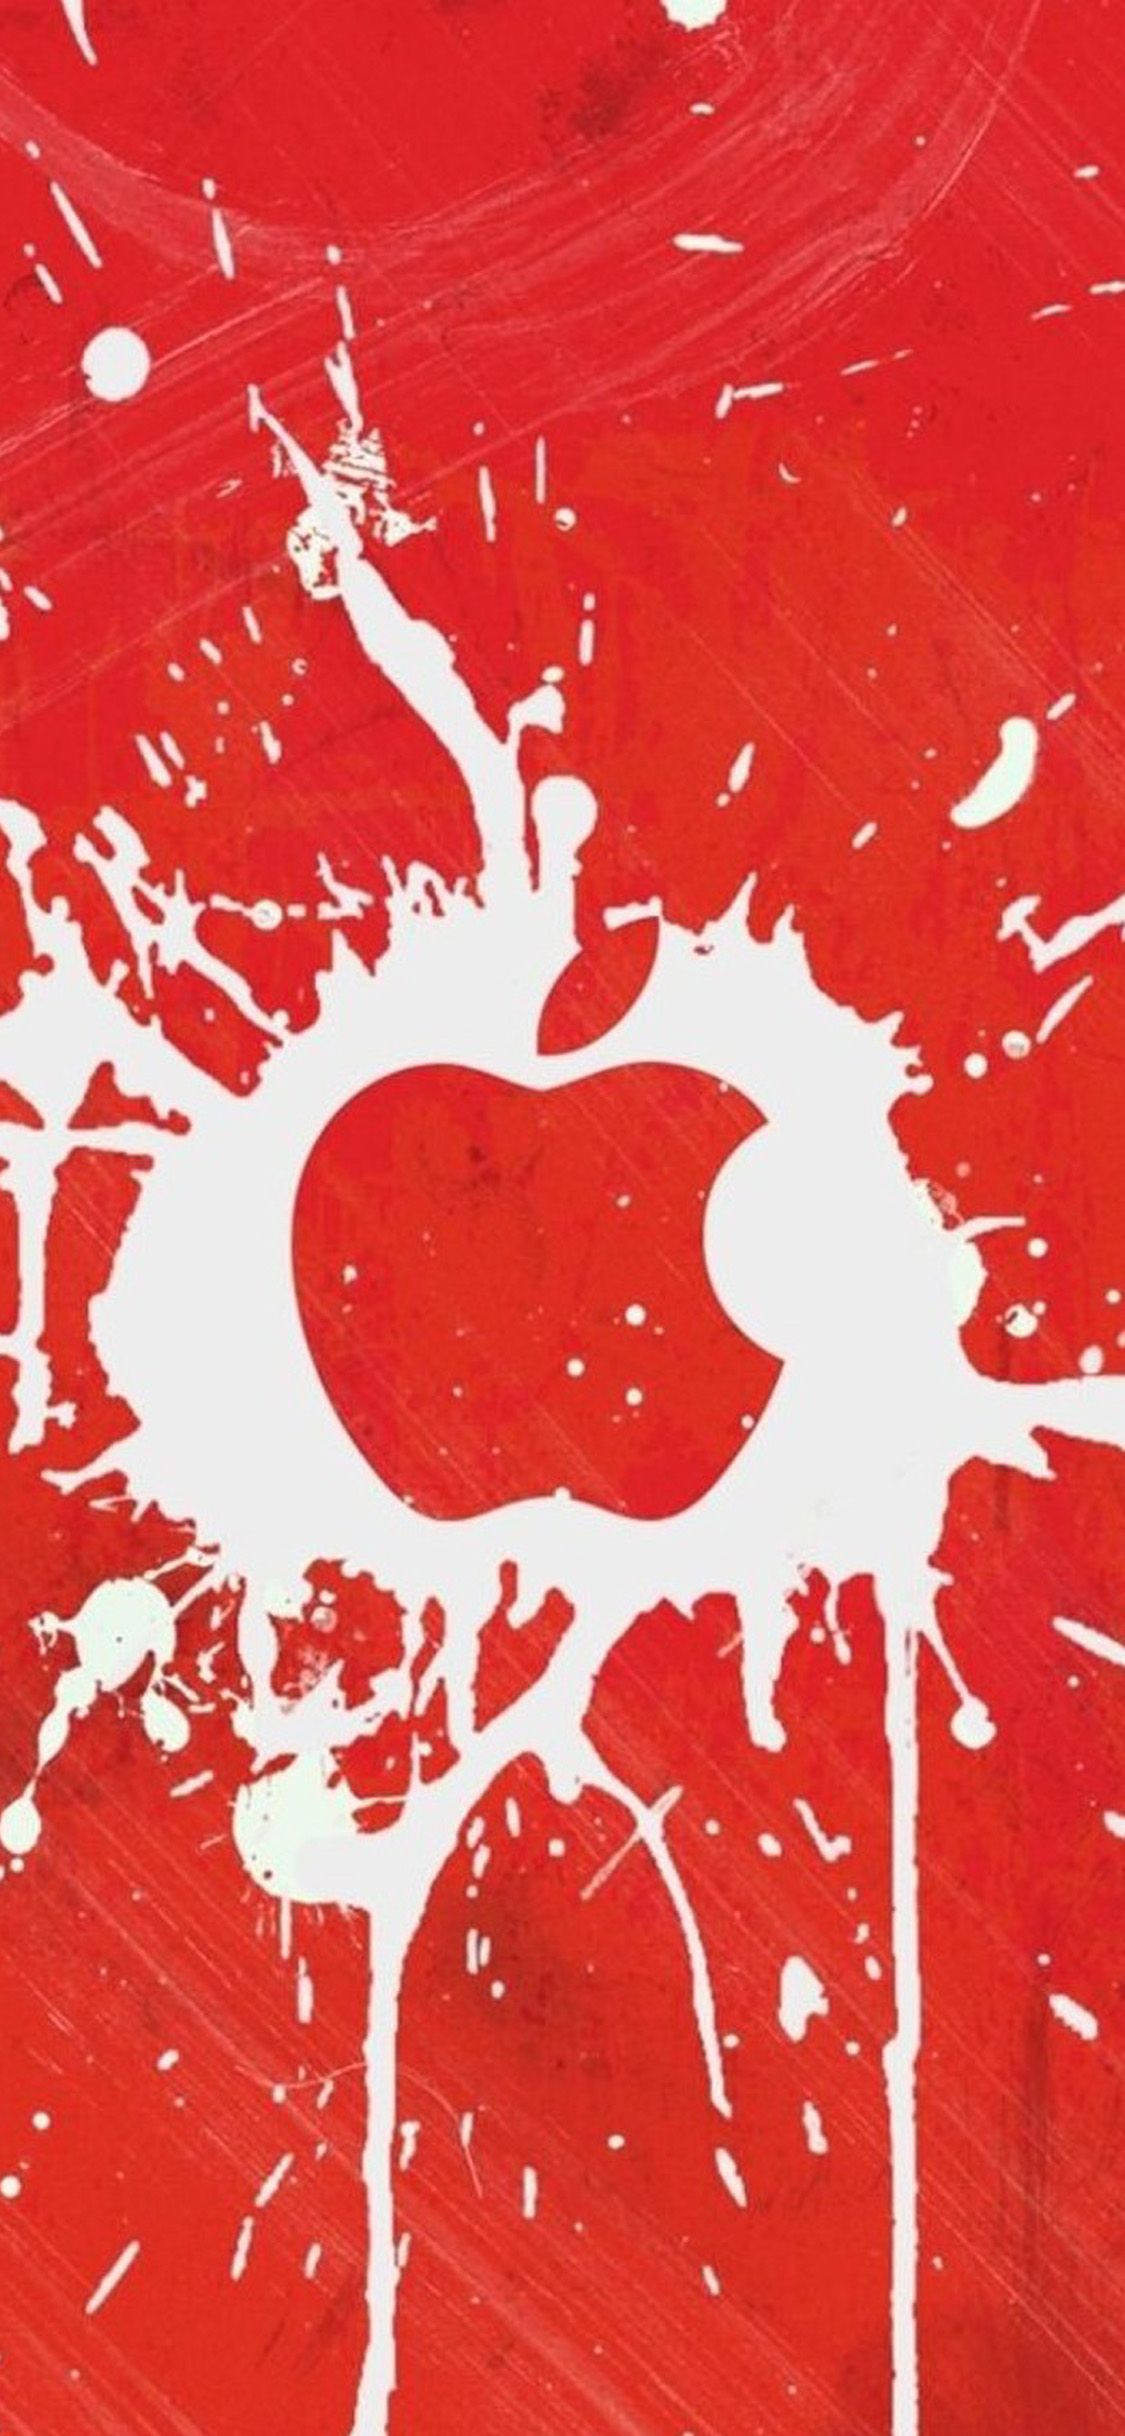 Red Apple iPhone Wallpaper Free Red Apple iPhone